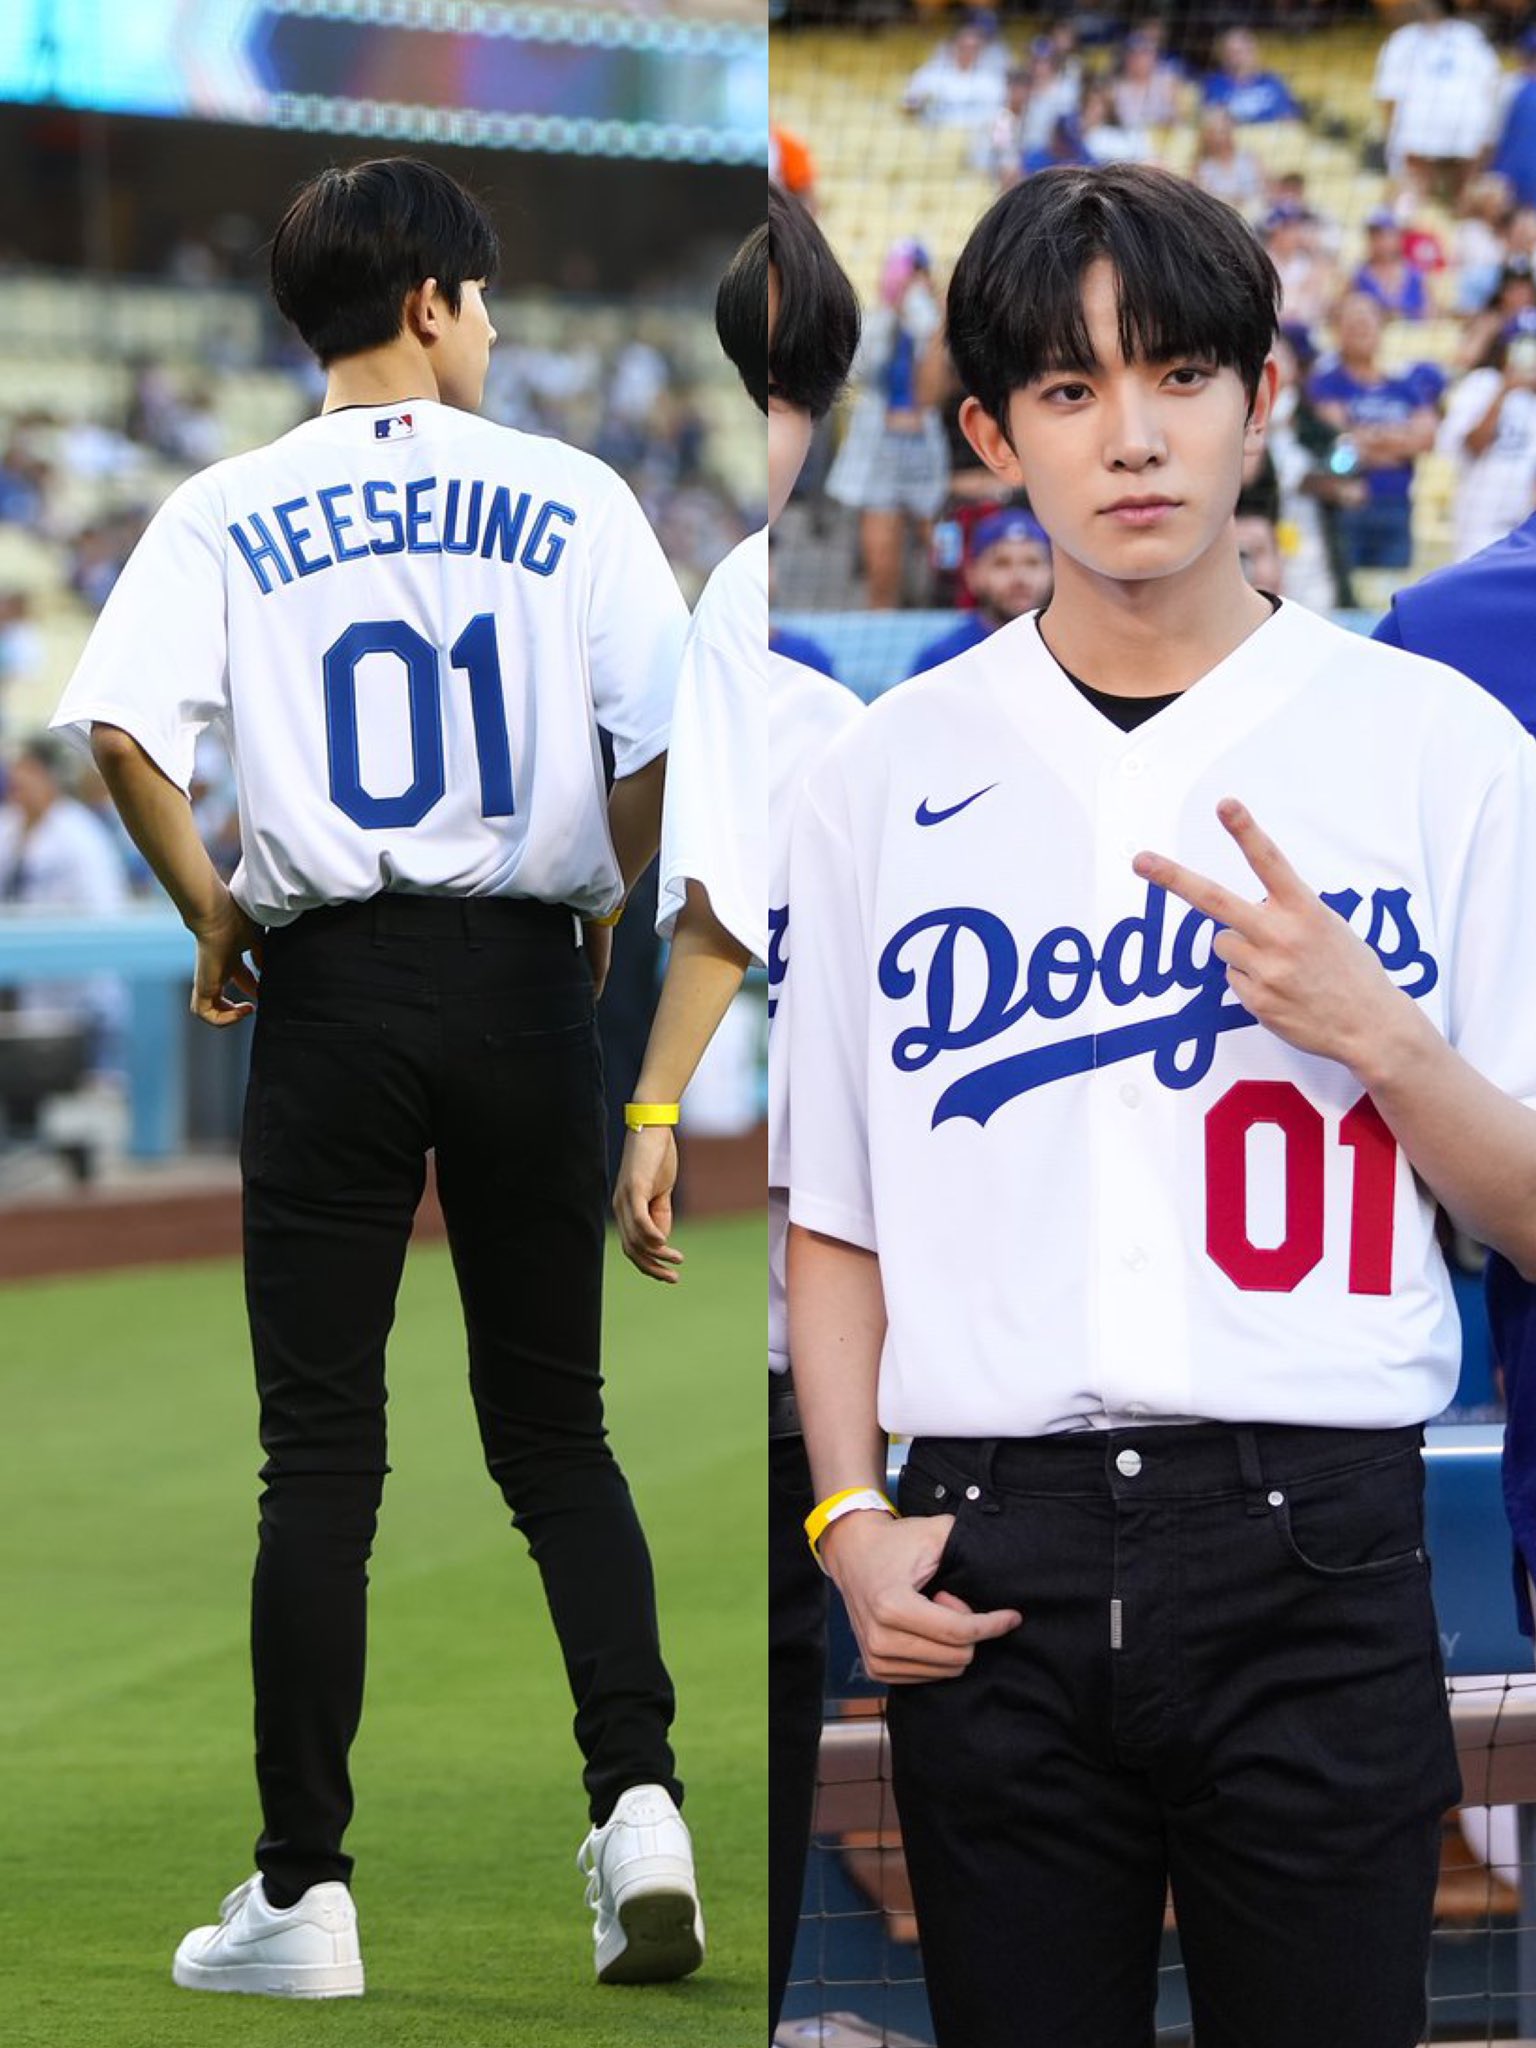 ⭒ on X: #heeseung at the dodgers game!  / X